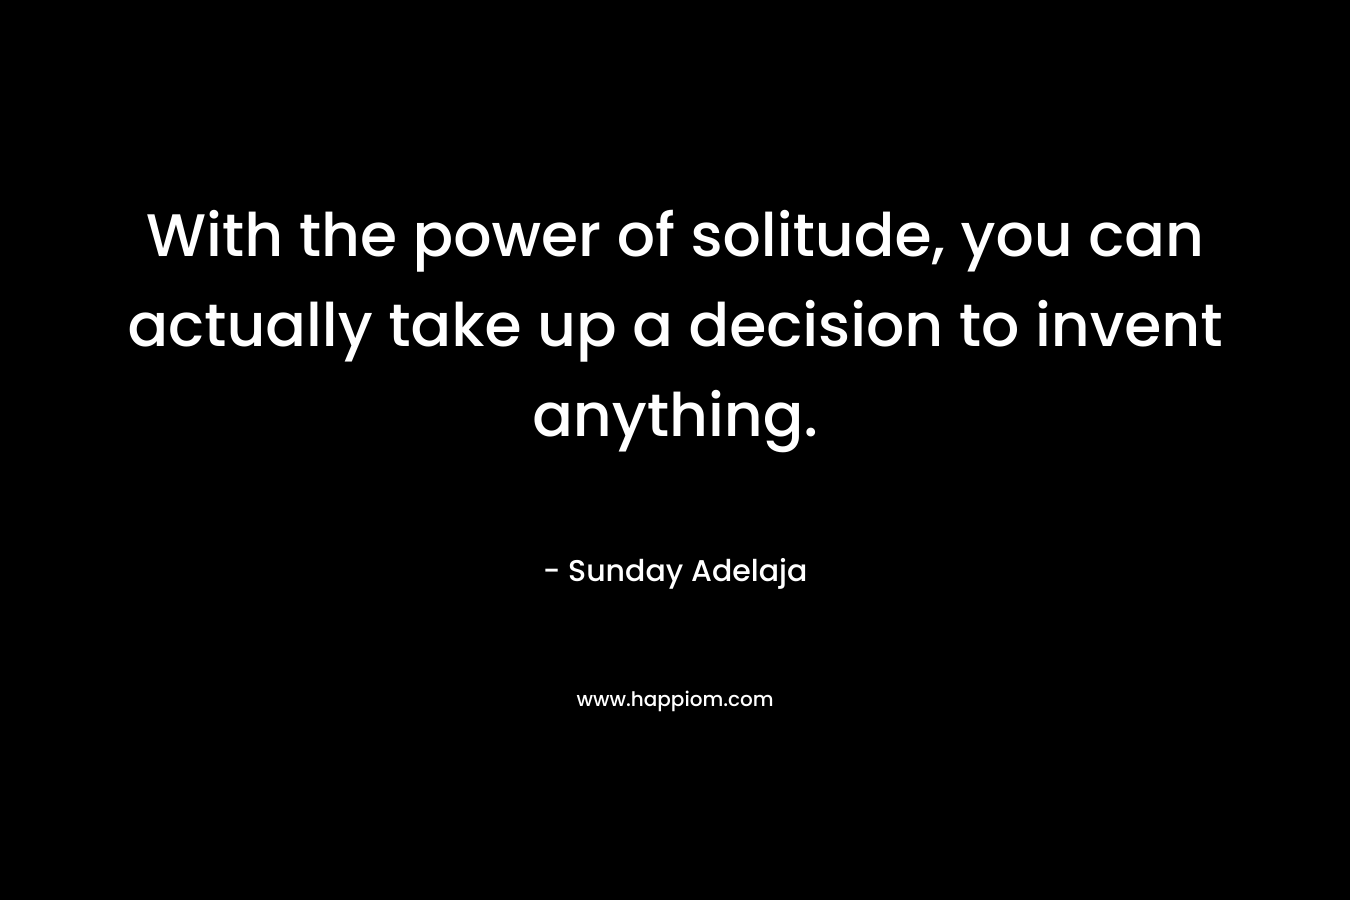 With the power of solitude, you can actually take up a decision to invent anything.